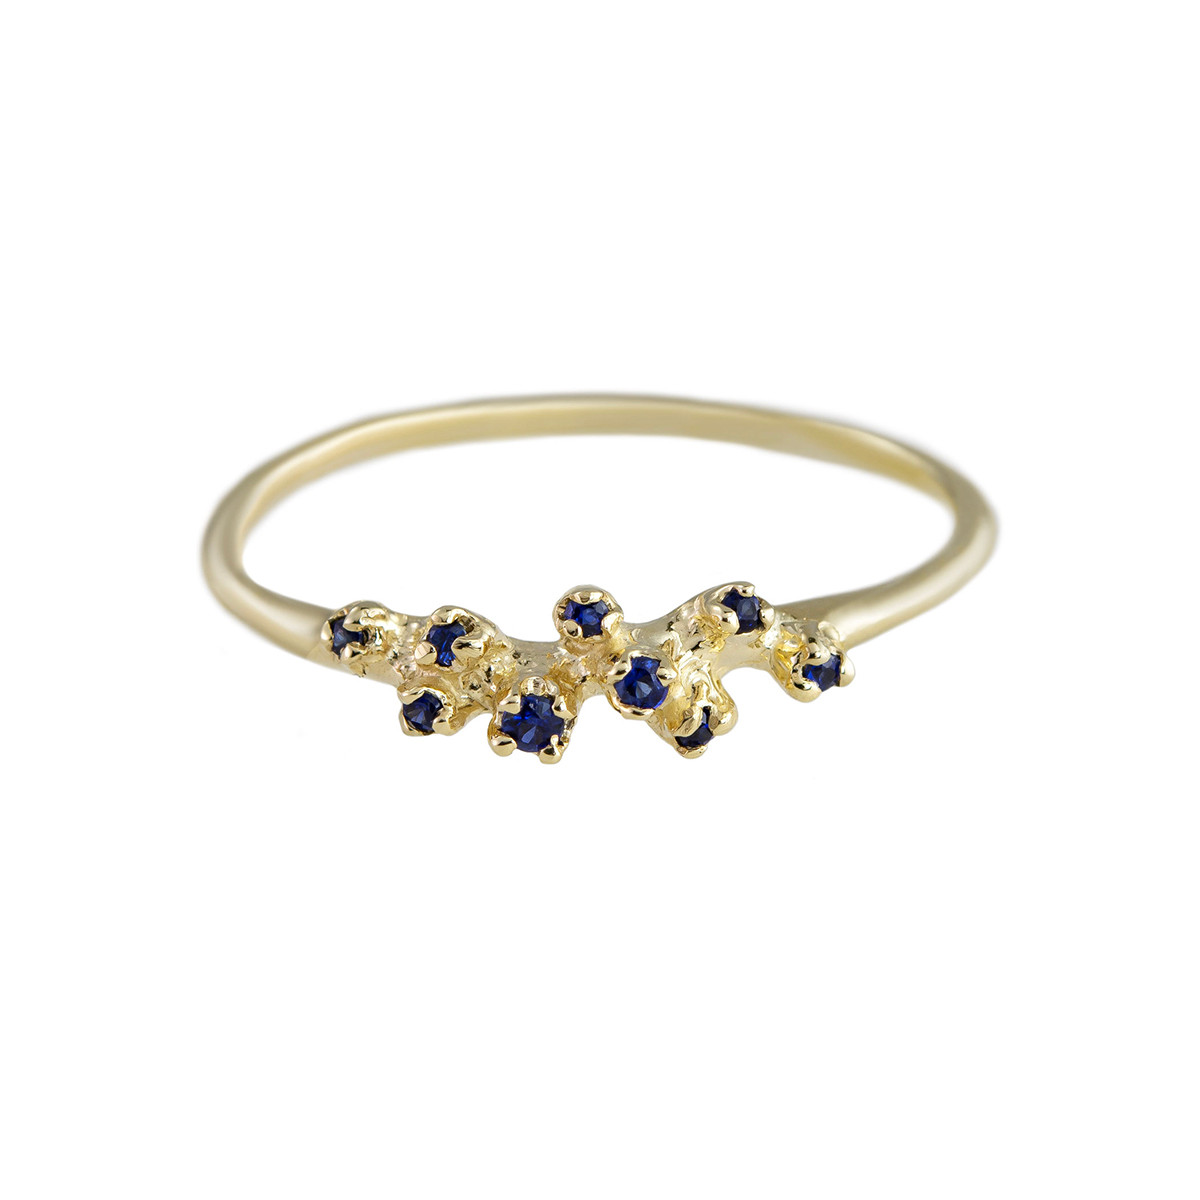 n+a New York, Blue Sapphire & 14ct Yellow Gold Three Cluster Ring, Tomfoolery